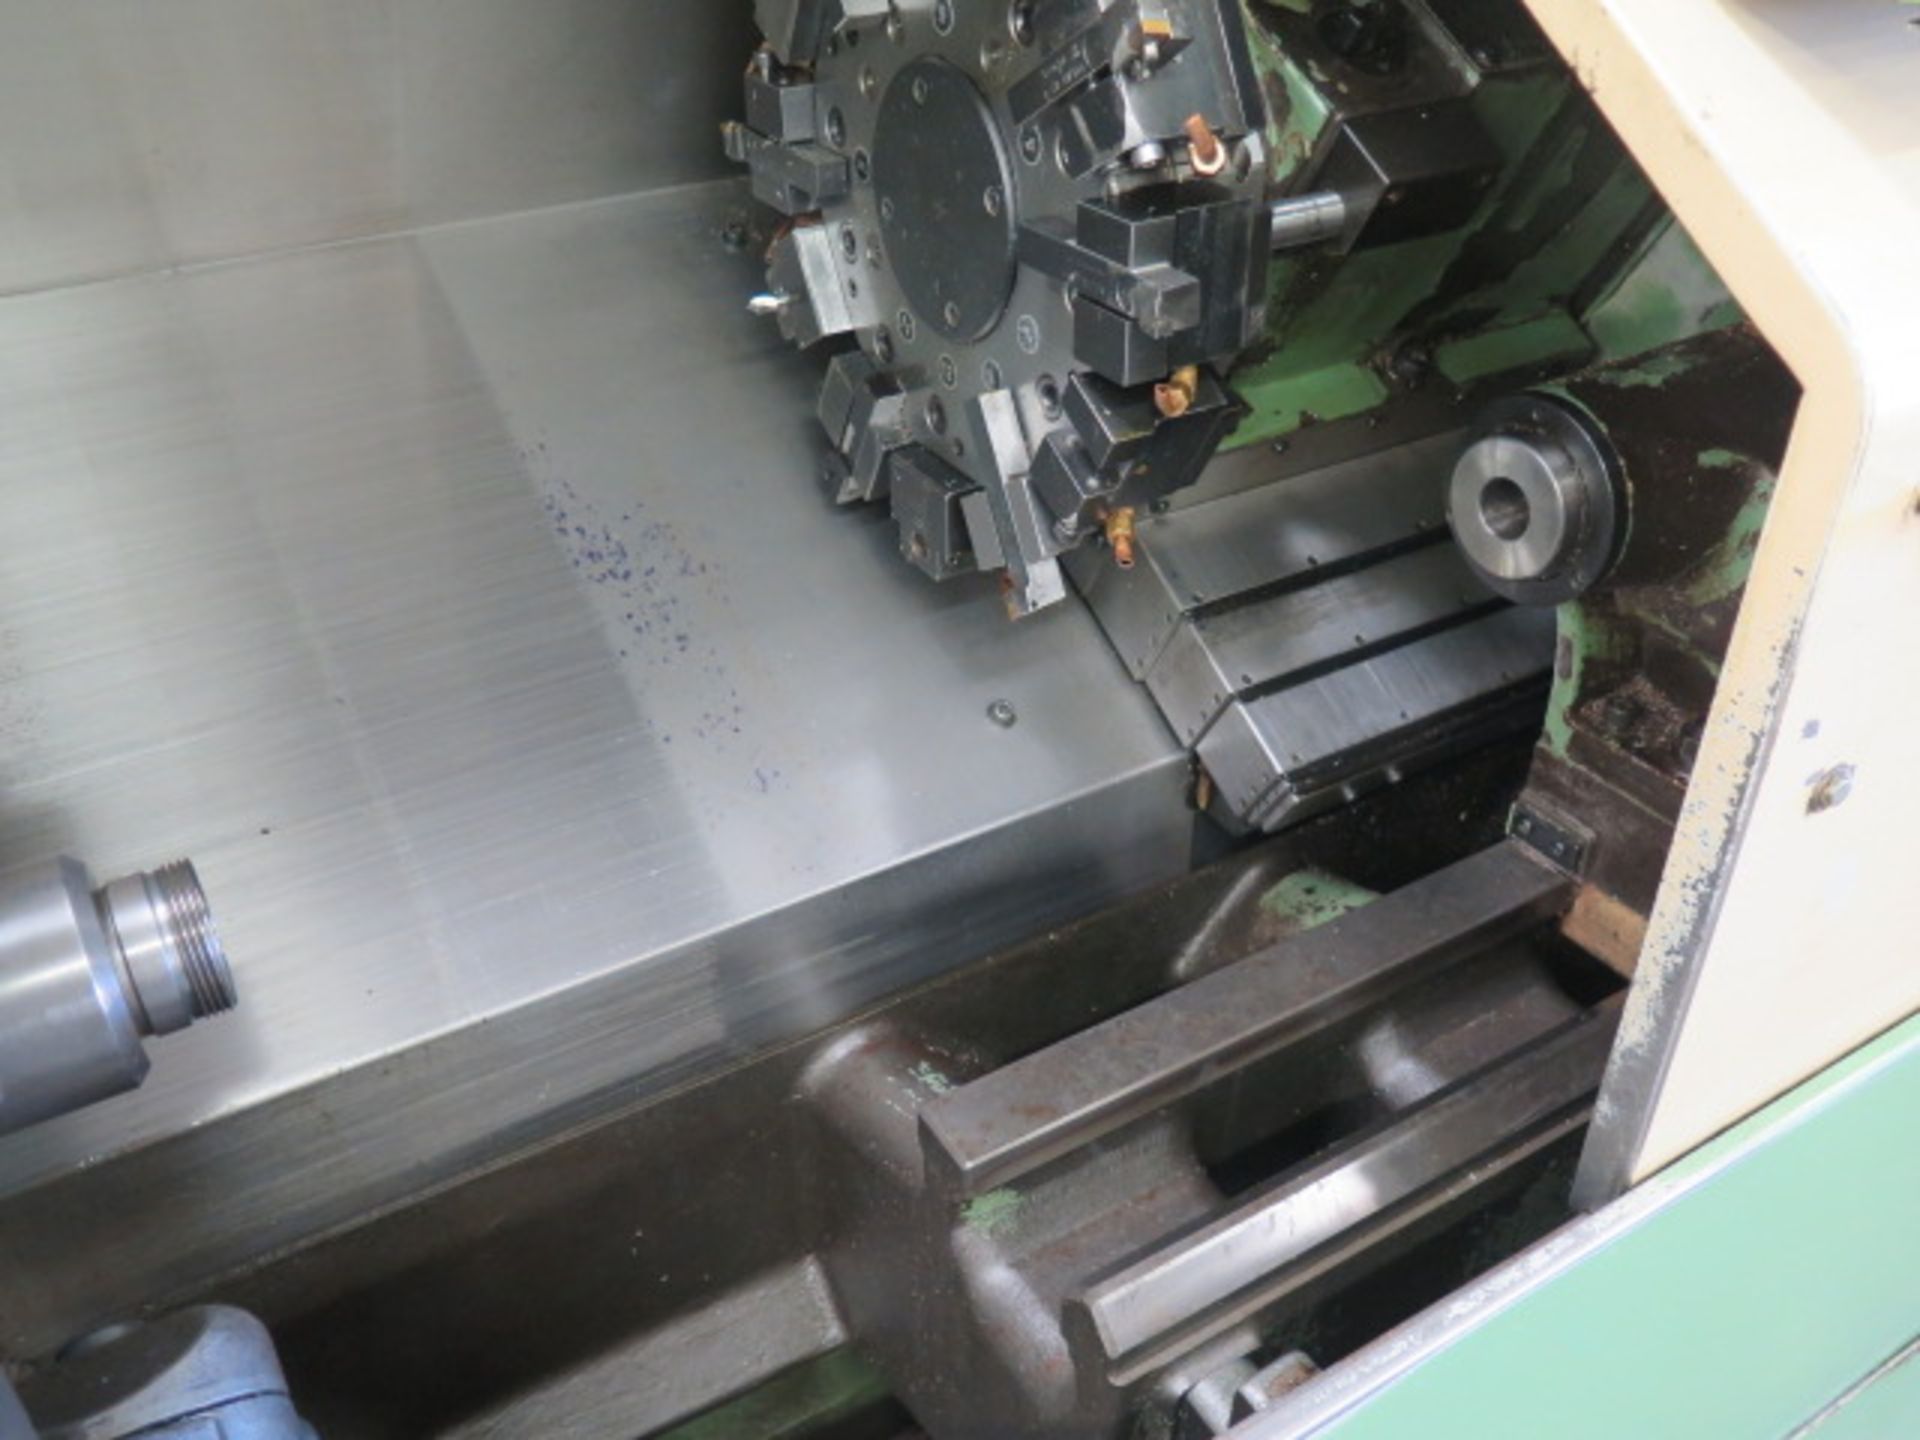 Mori Seiki AL-2ATM CNC Turning Center s/n 1584 w/ Yasnac Controls, Tool Presetter, SOLD AS IS - Image 11 of 27